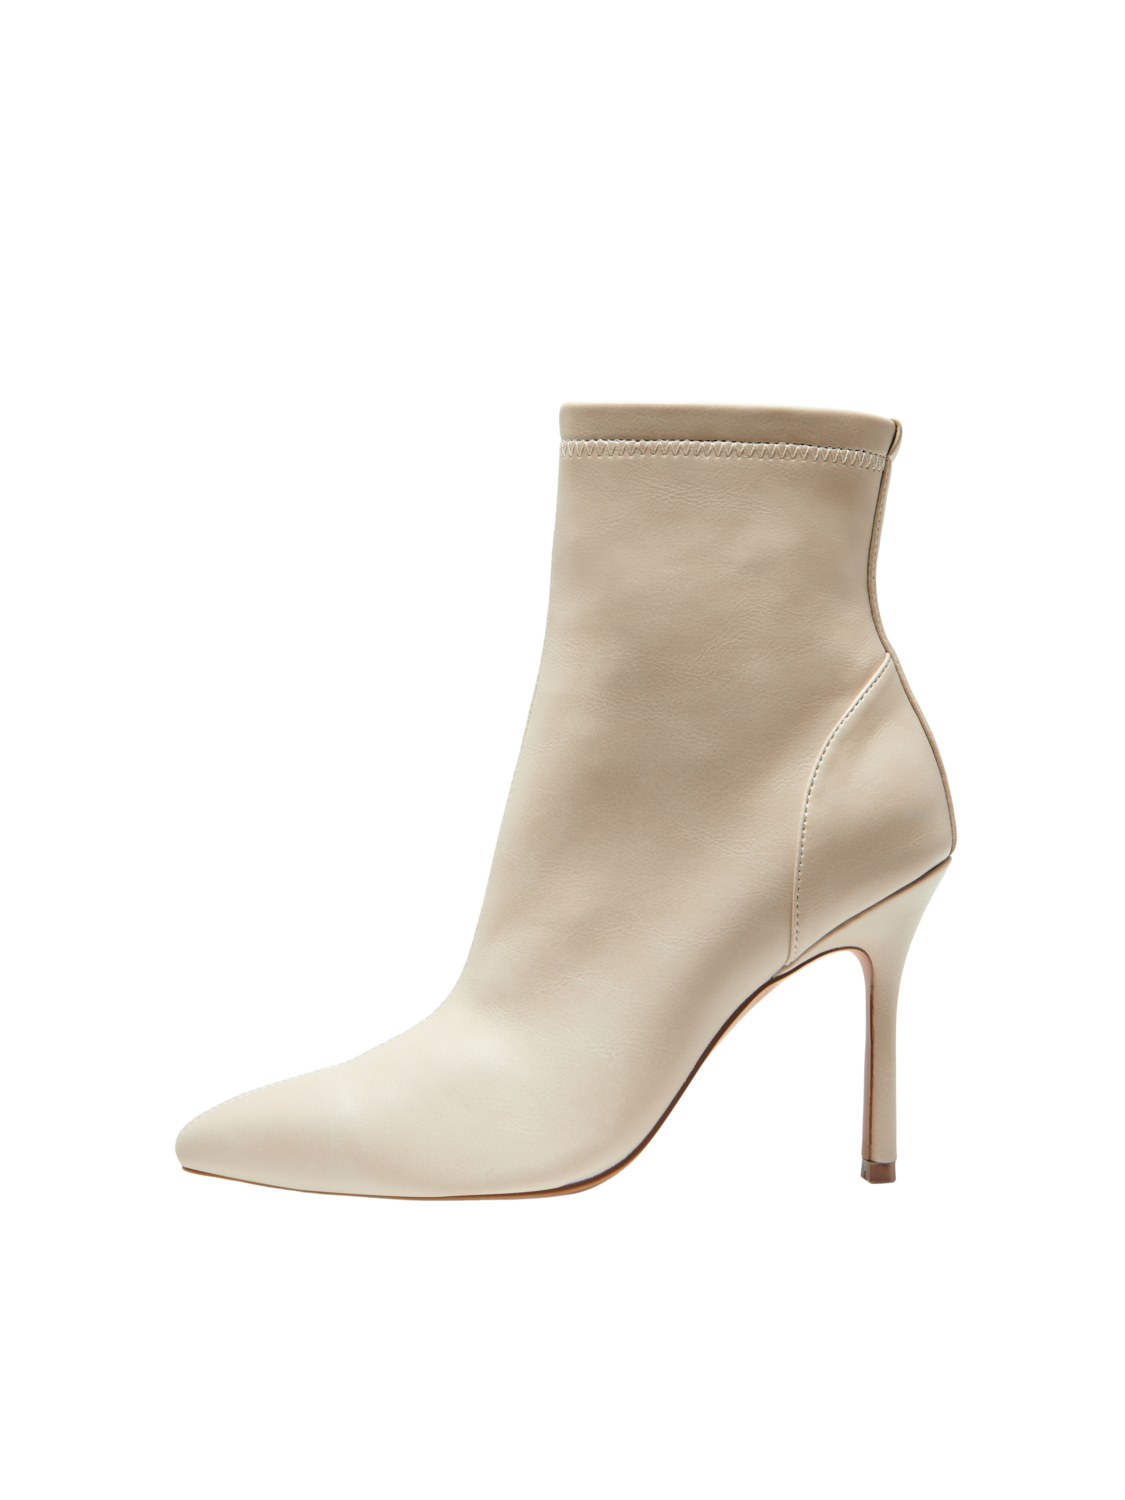 Cali stiletto heel ankle boots, CREME, large